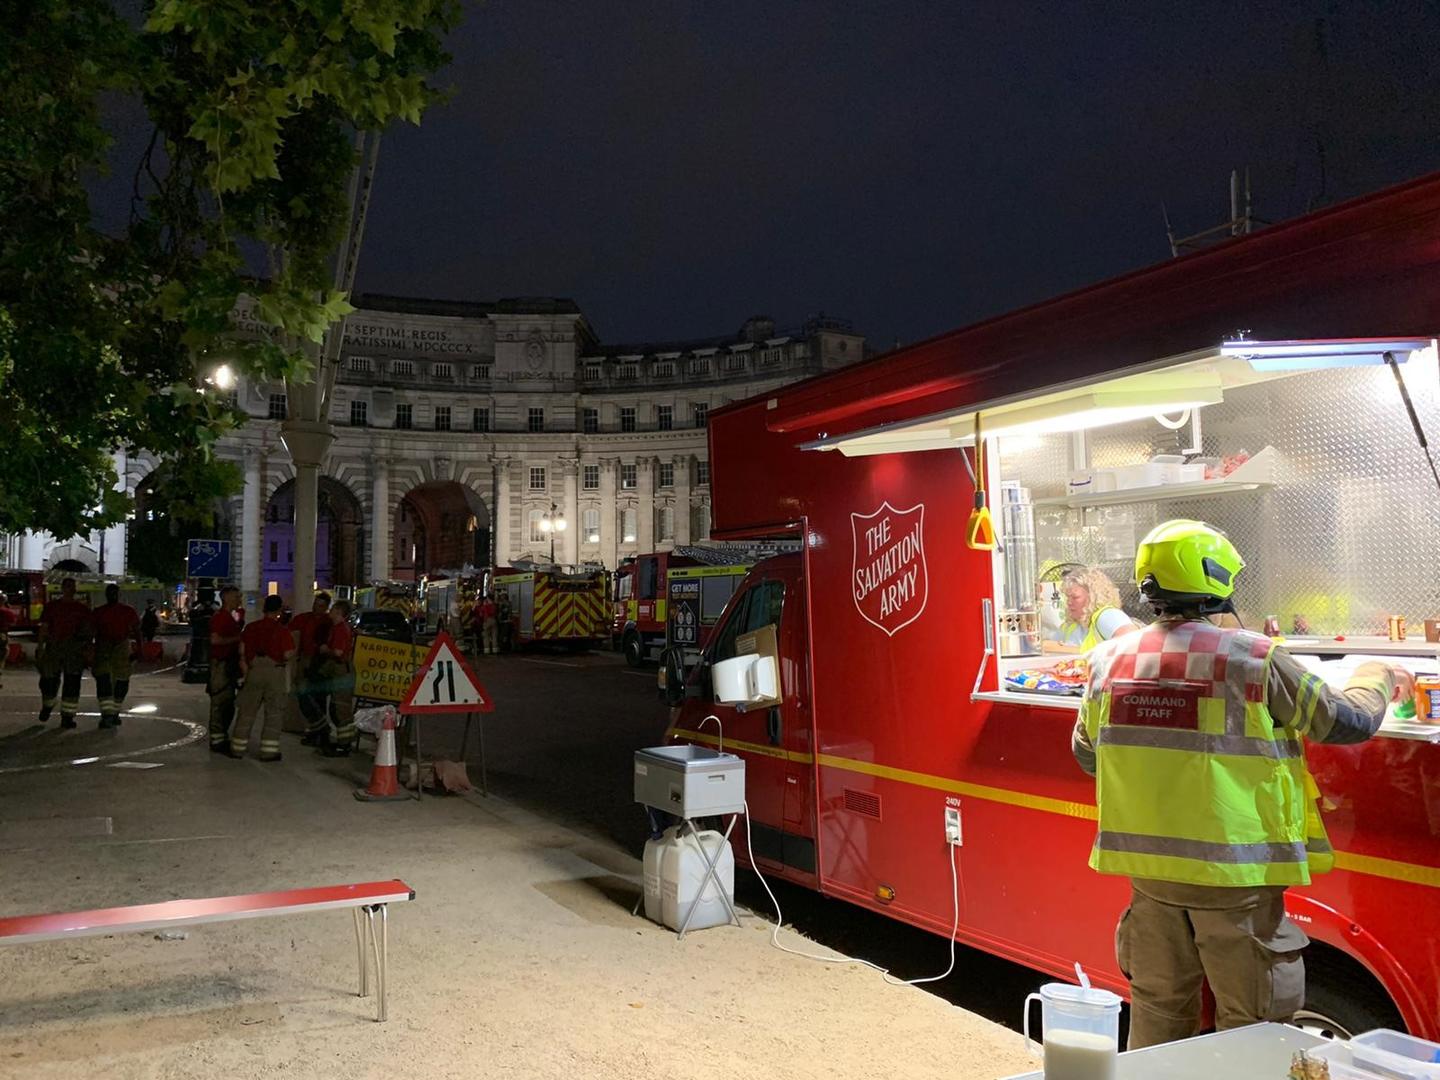 The Salvation Army Incident Response vehicle providing refreshments to emergency responders in Trafalgar Square.